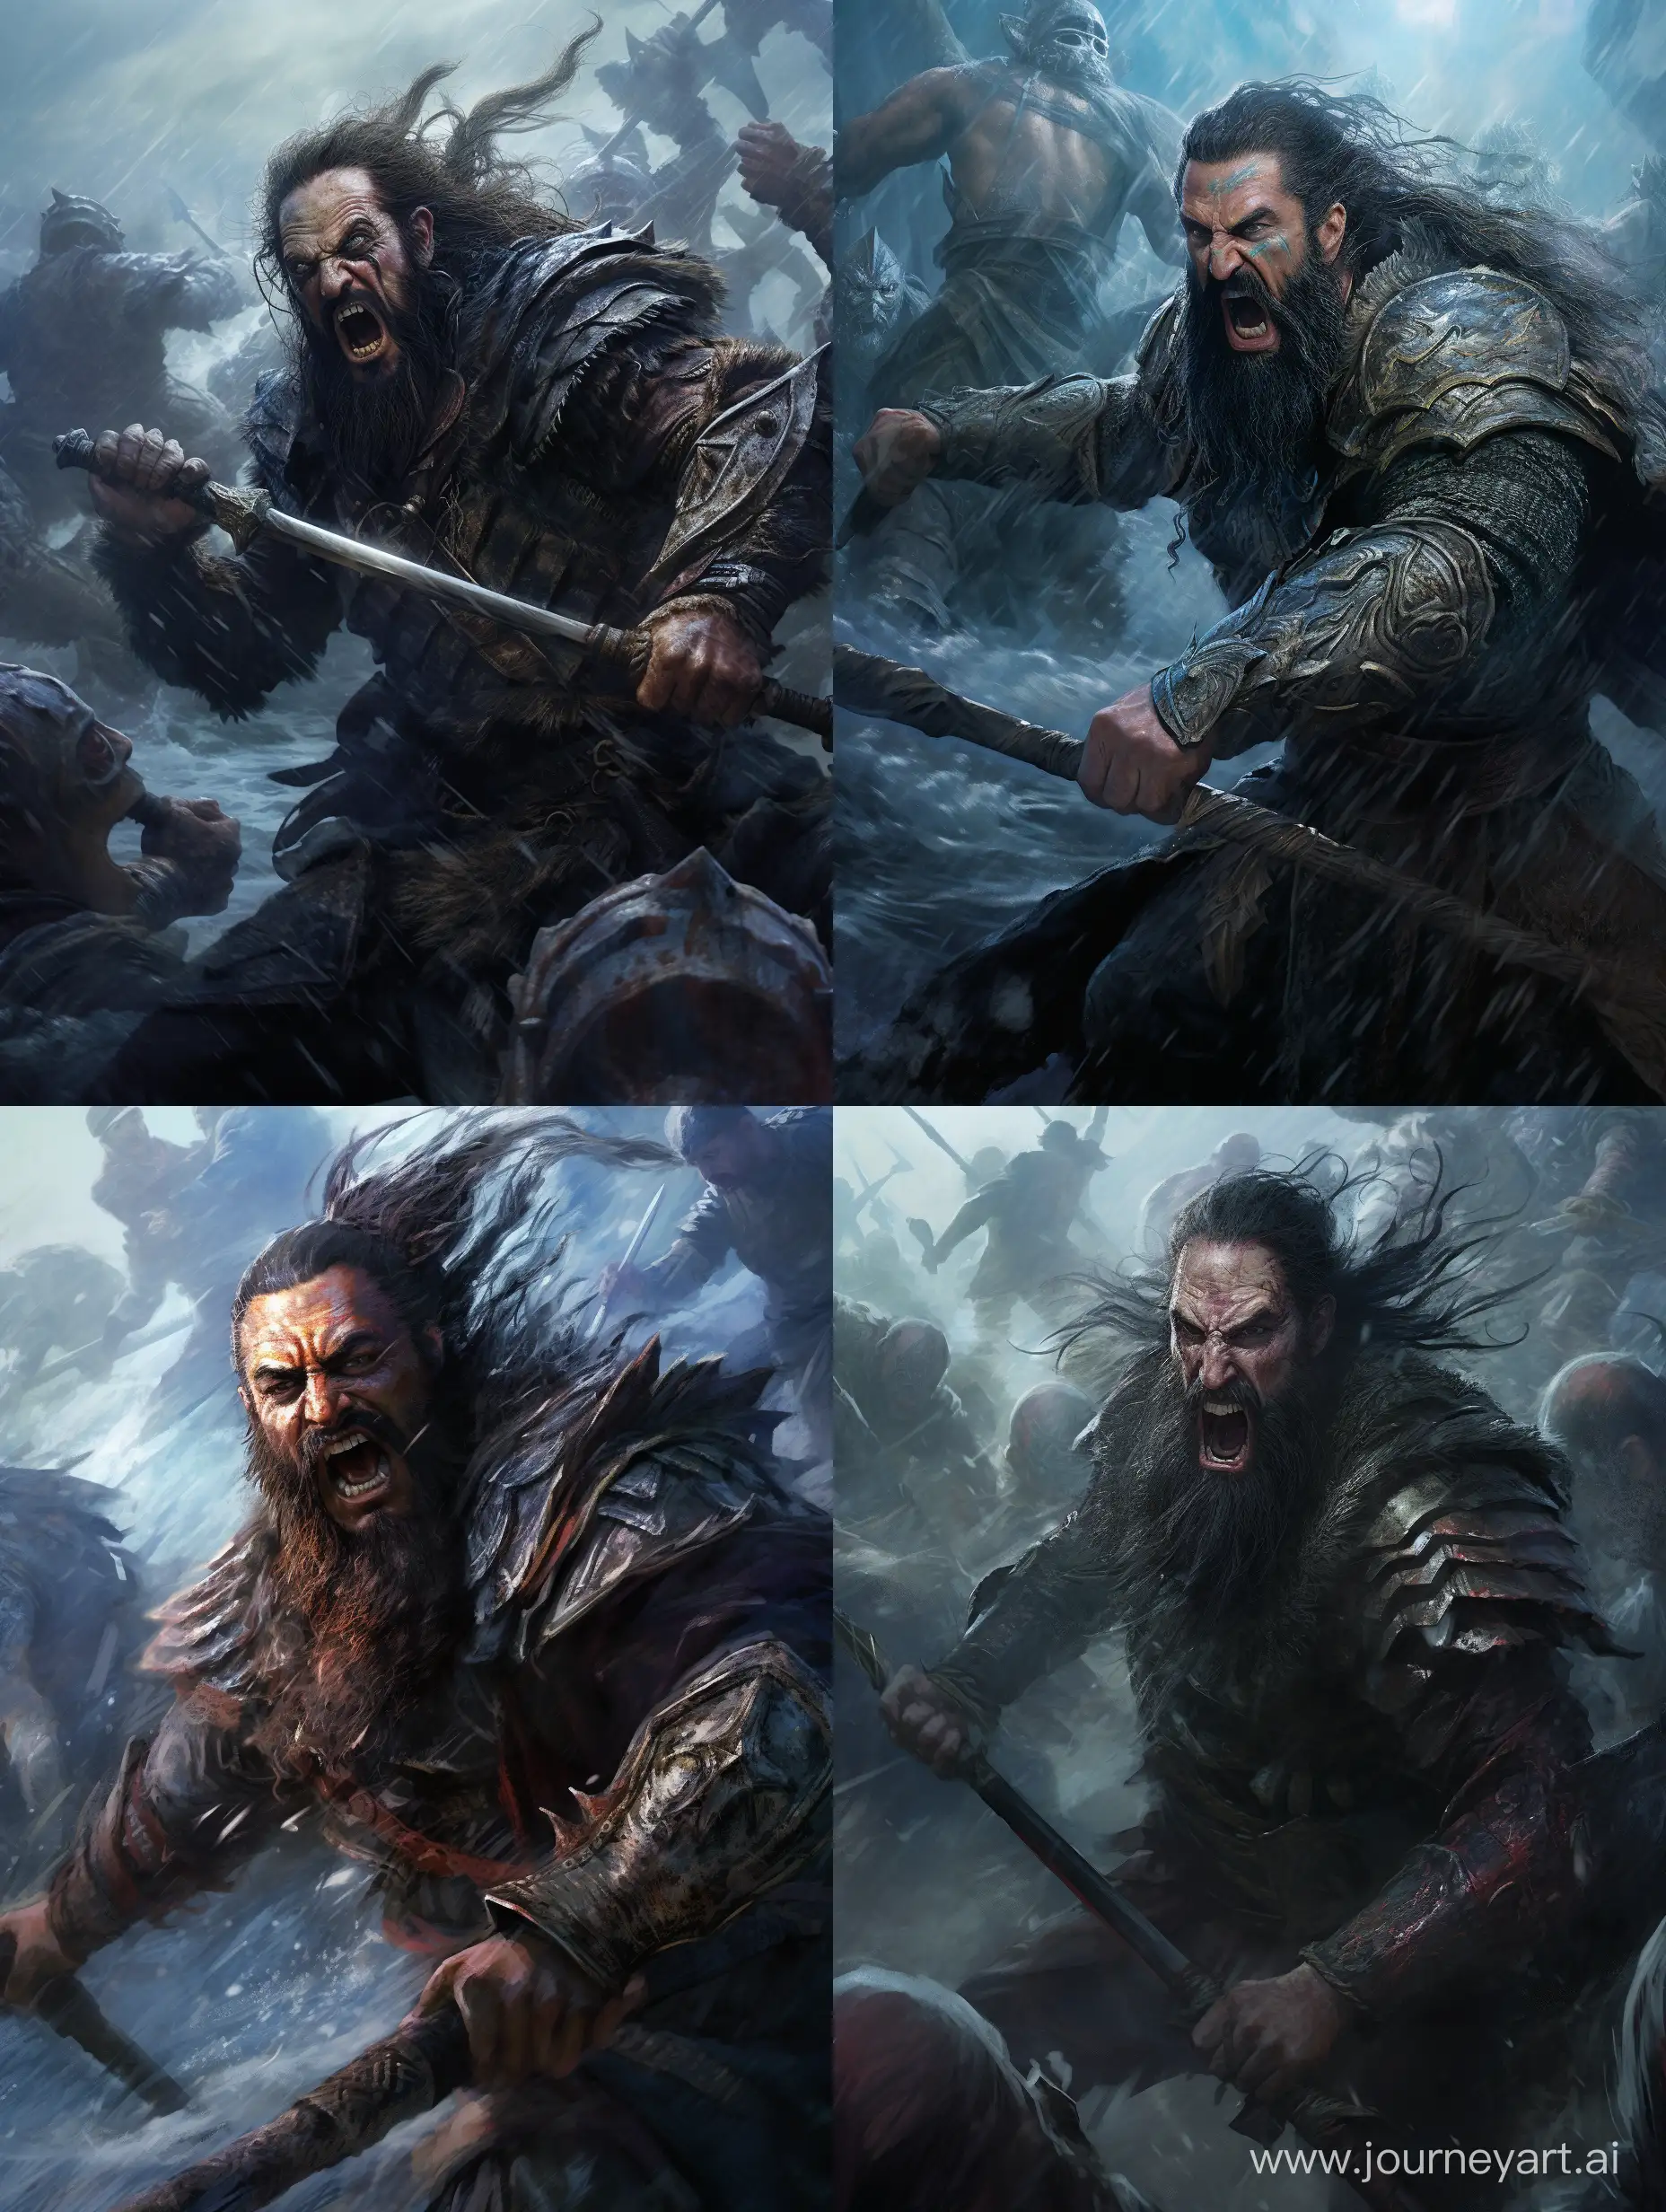 /imagine prompt: A hyper-realistic and highly detailed image that captures the essence of Blackbeard attacking other ships in a war scene. The atmosphere is tense and chaotic, with the lighting emphasizing the destruction and the action. The color temperature is cool, with a hint of blue, evoking the cold waters of the Atlantic. Blackbeard is shown in full body, with a fierce expression on his face as he leads the attack. The other ships are in the background, with smoke and debris filling the air. The image has a cinematic quality, evoking the excitement and danger of a scene from a high-budget pirate movie. The composition is dynamic, with the focus on Blackbeard and his crew as they engage in a fierce battle with their enemies. The background is highly detailed, with intricate details in the ships and the waves of the ocean. The image is in 12K resolution, allowing for maximum detail and clarity, making it a perfect fit for large screens and immersive experiences. --ar 3:4 